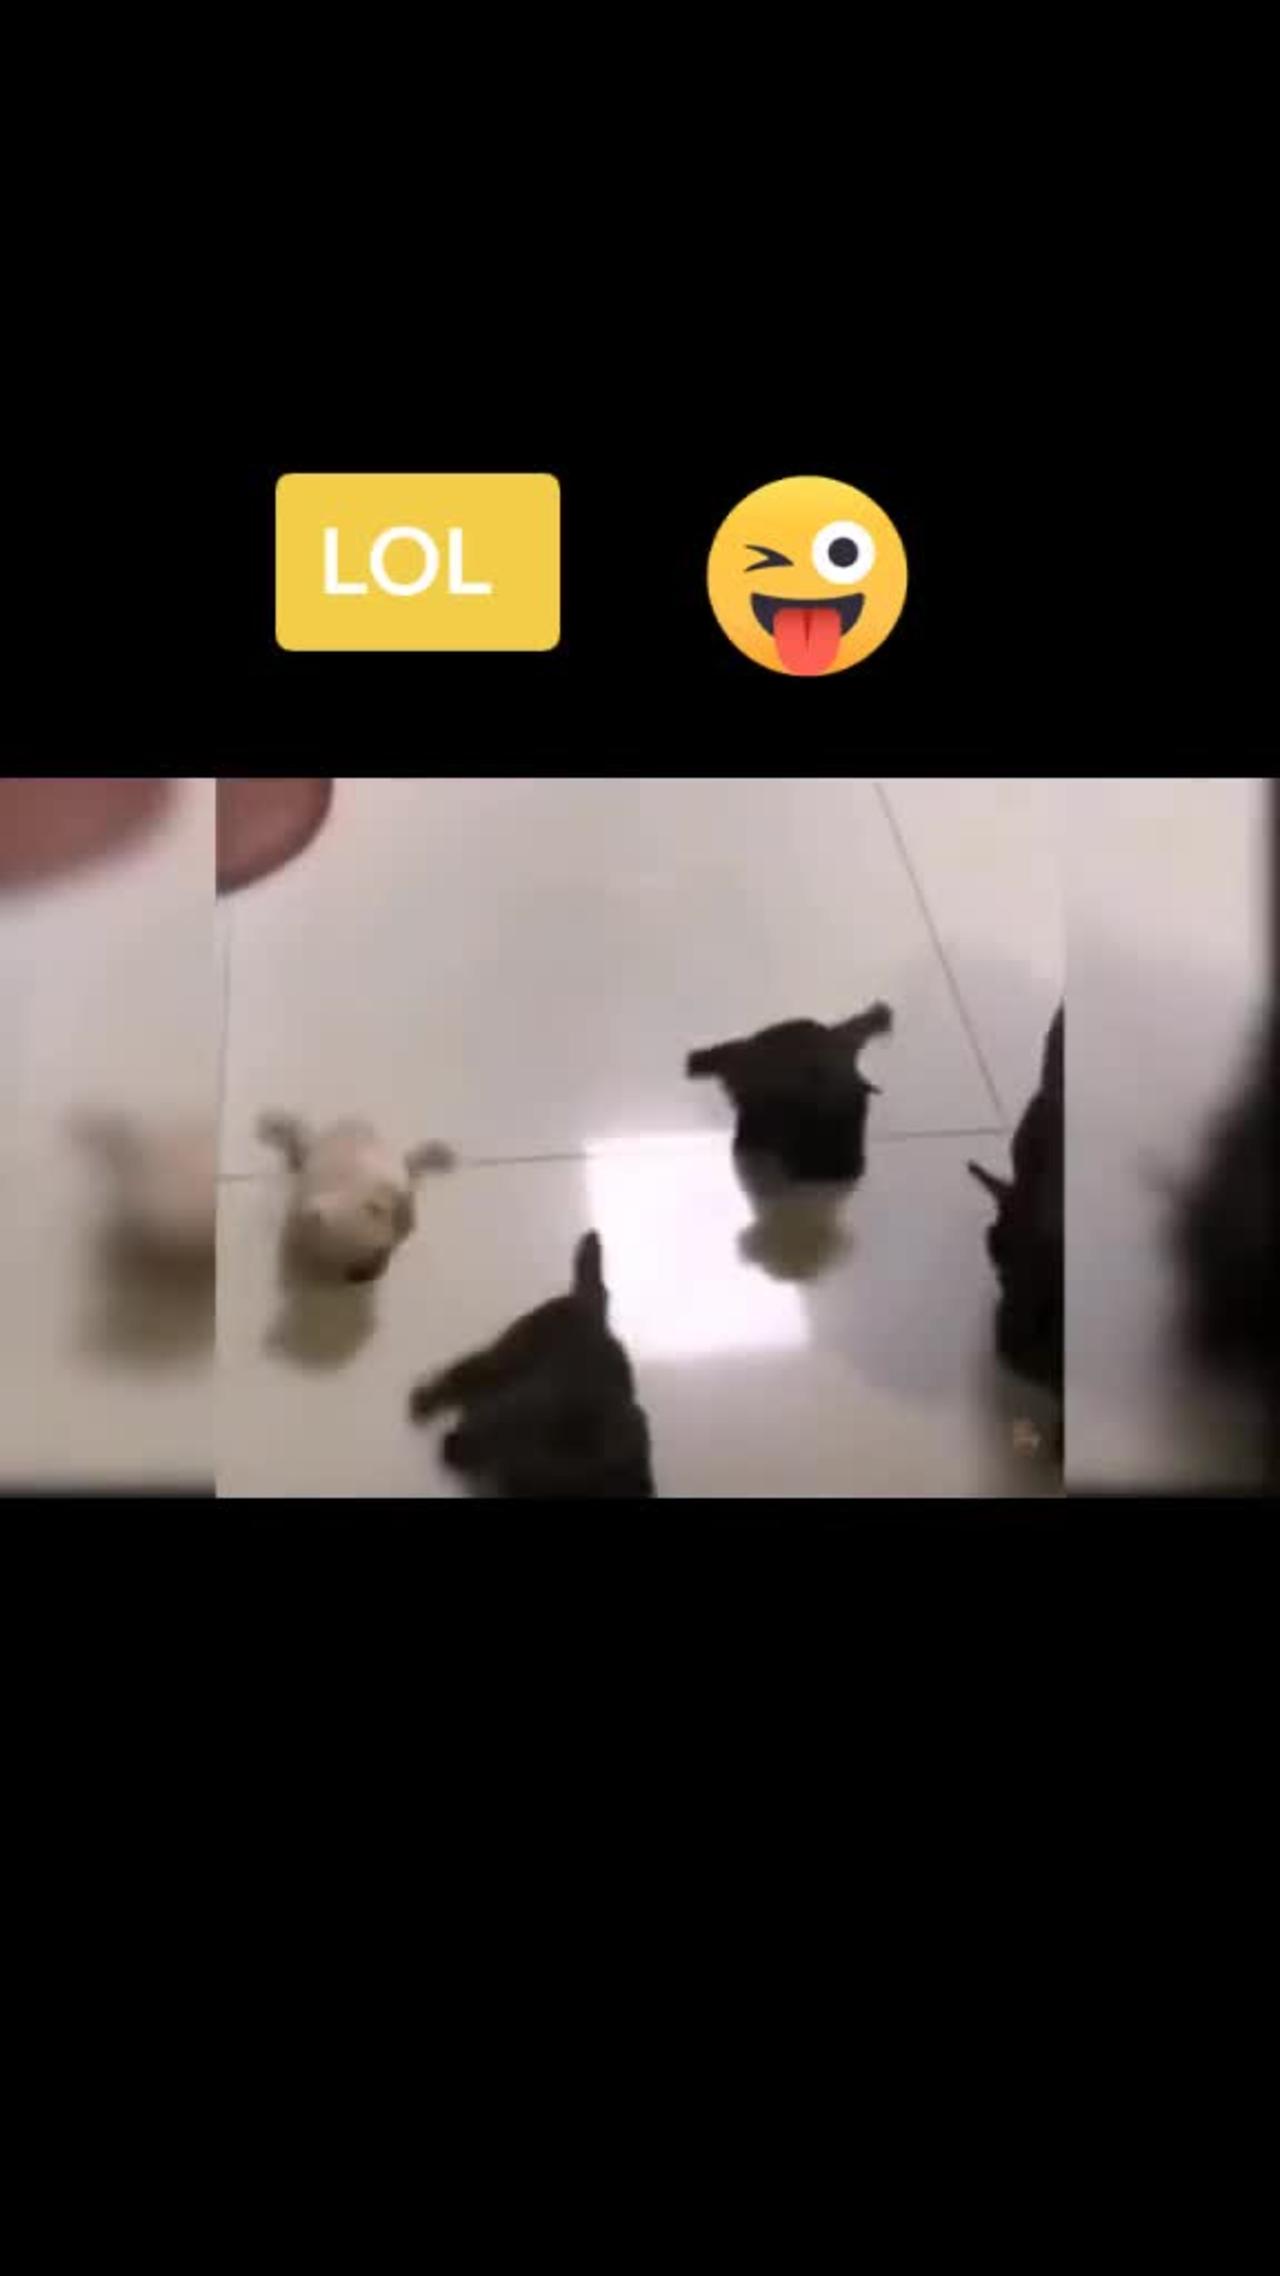 SO FUNNY😂😂 Super Dogs And Cats Reaction Videos ▶️1